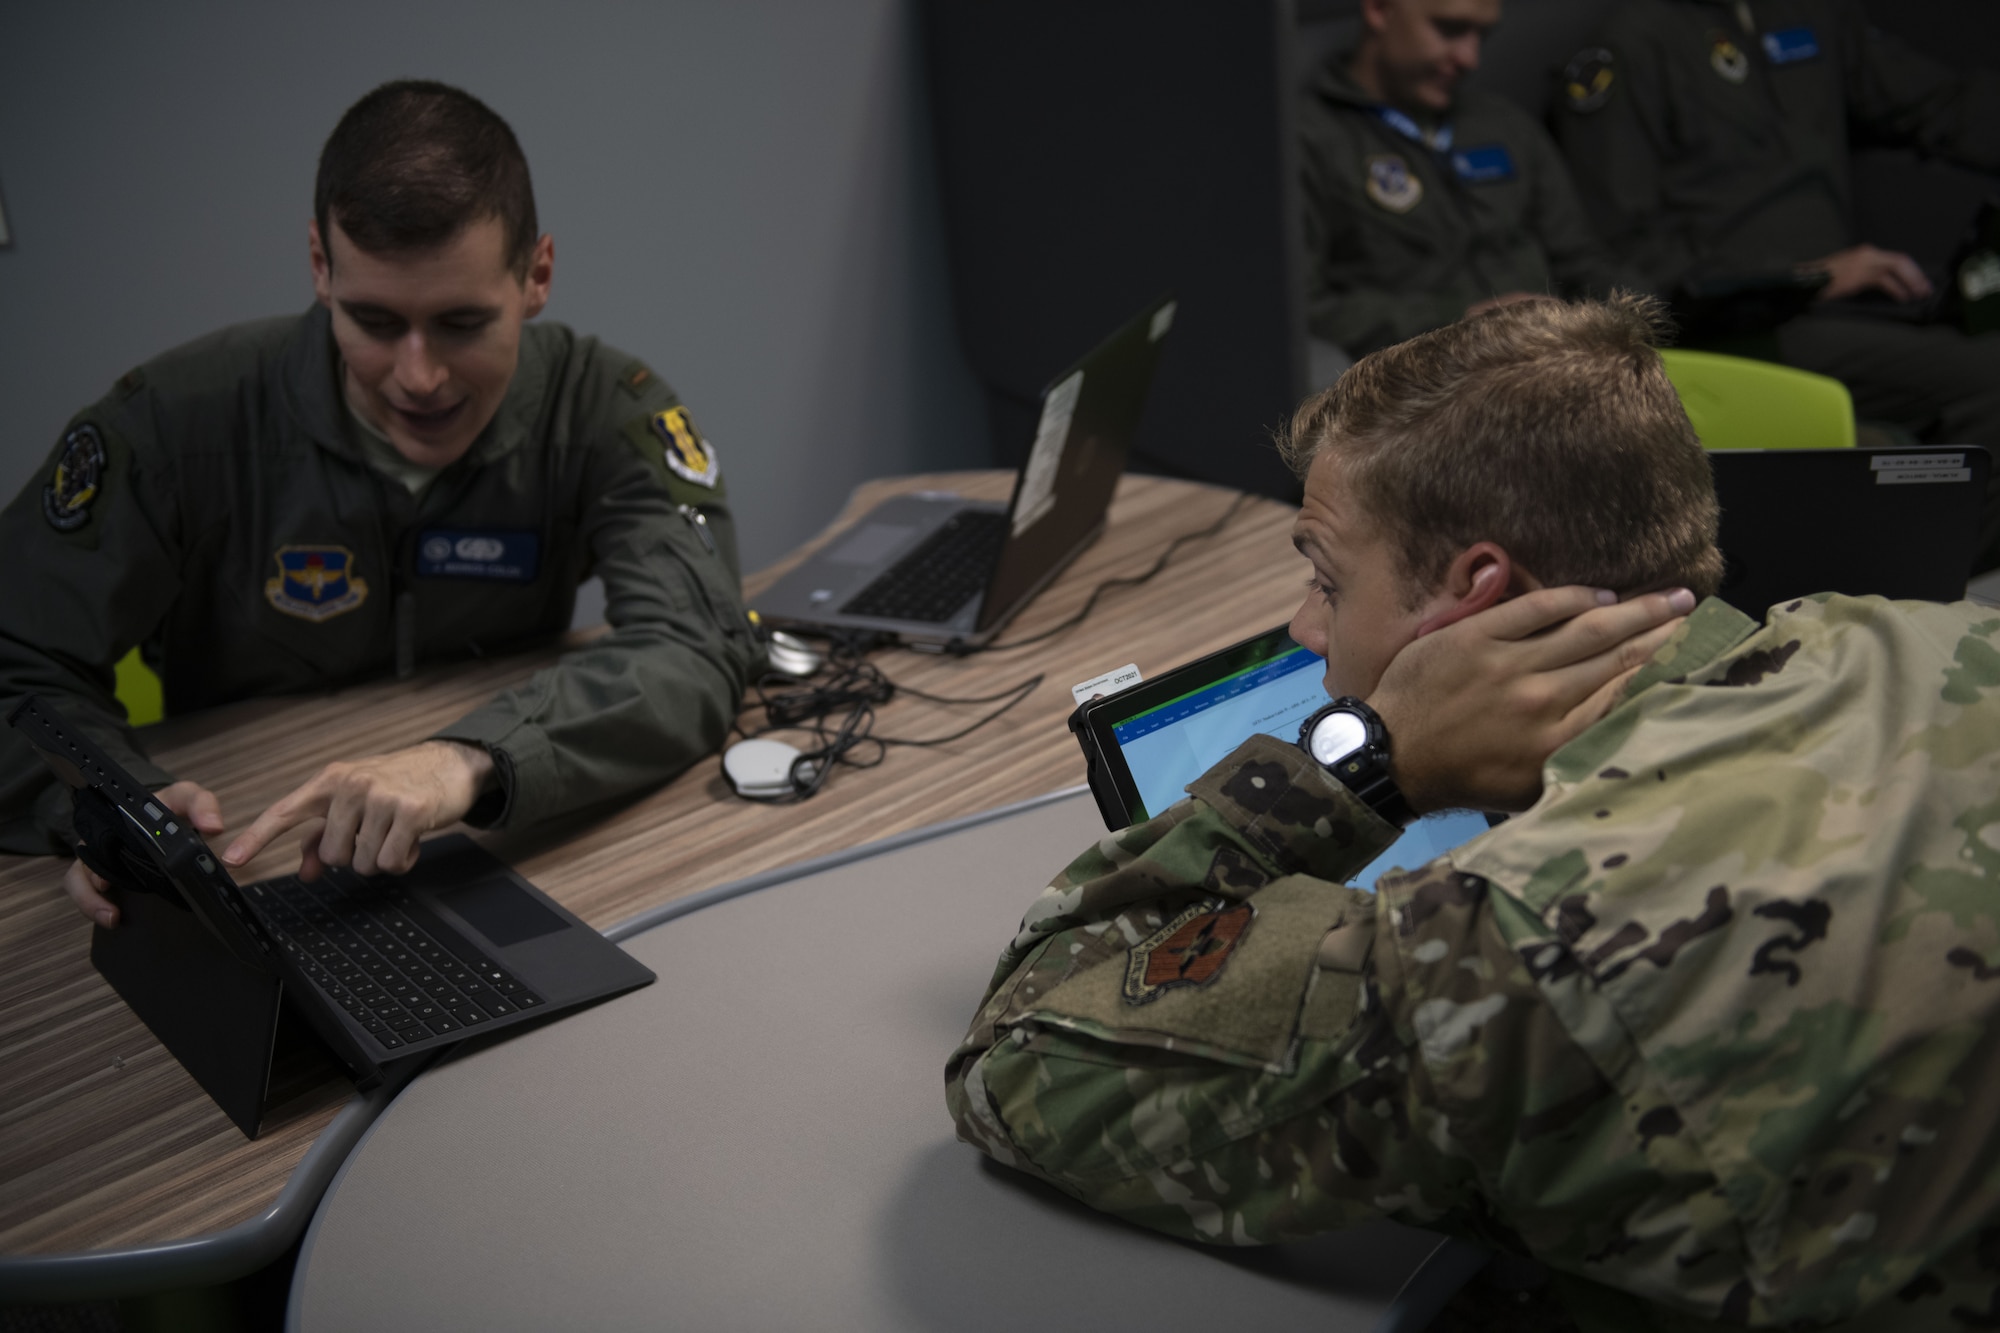 Undergraduate ABM Course students study material at Tyndall Air Force Base, Florida, Aug. 6, 2019. Students are given more freedom to study outside of the classroom by using tablets. (U.S. Air Force photo by Airman 1st Class Heather Leveille)